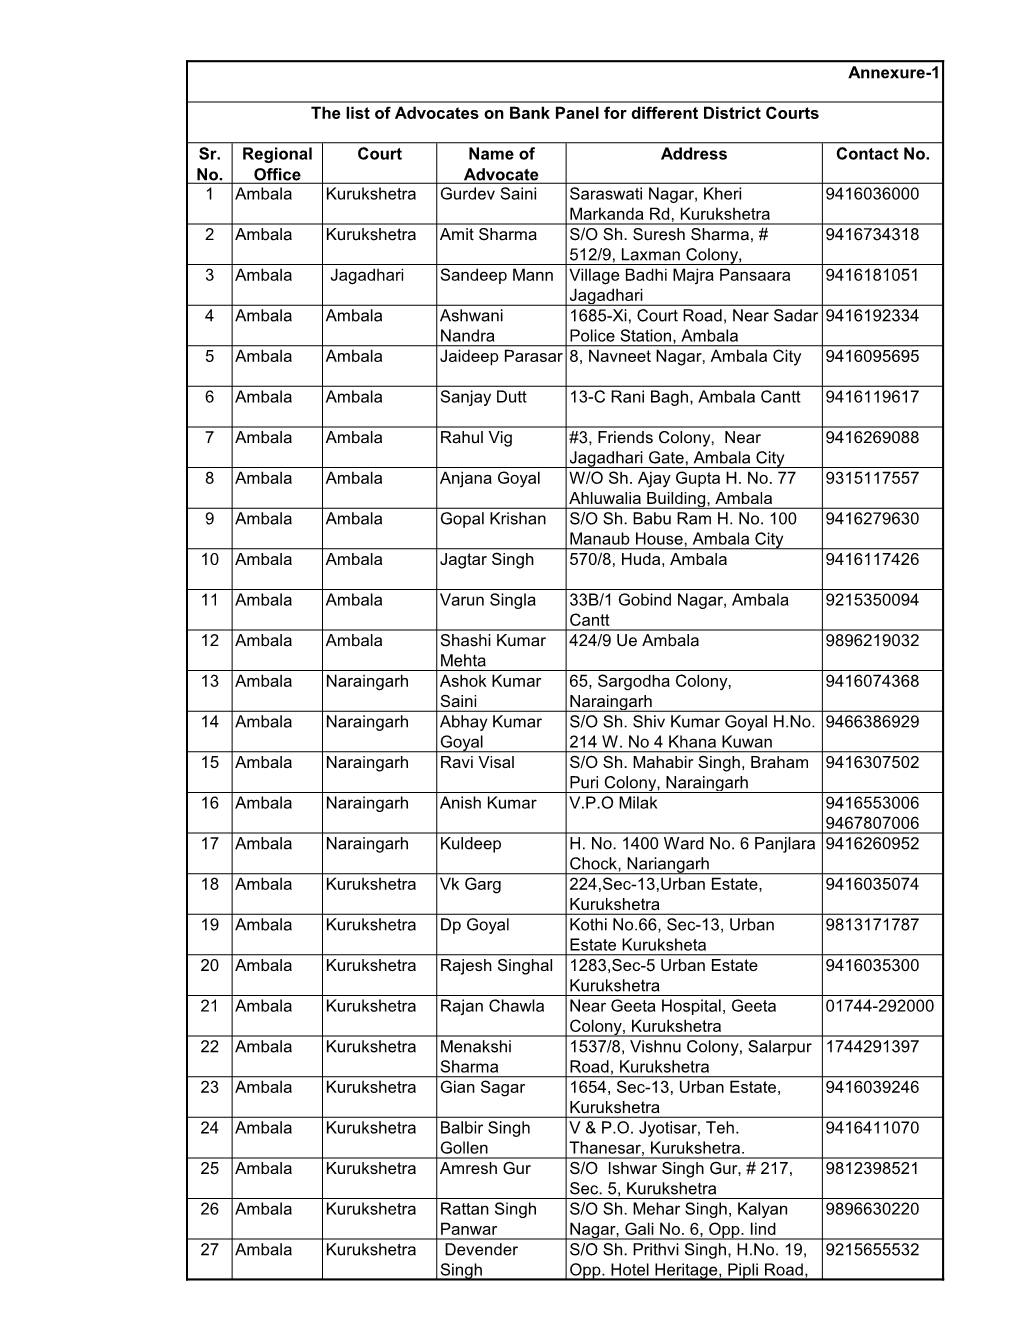 The List of Advocates on Bank Panel for Different District Courts